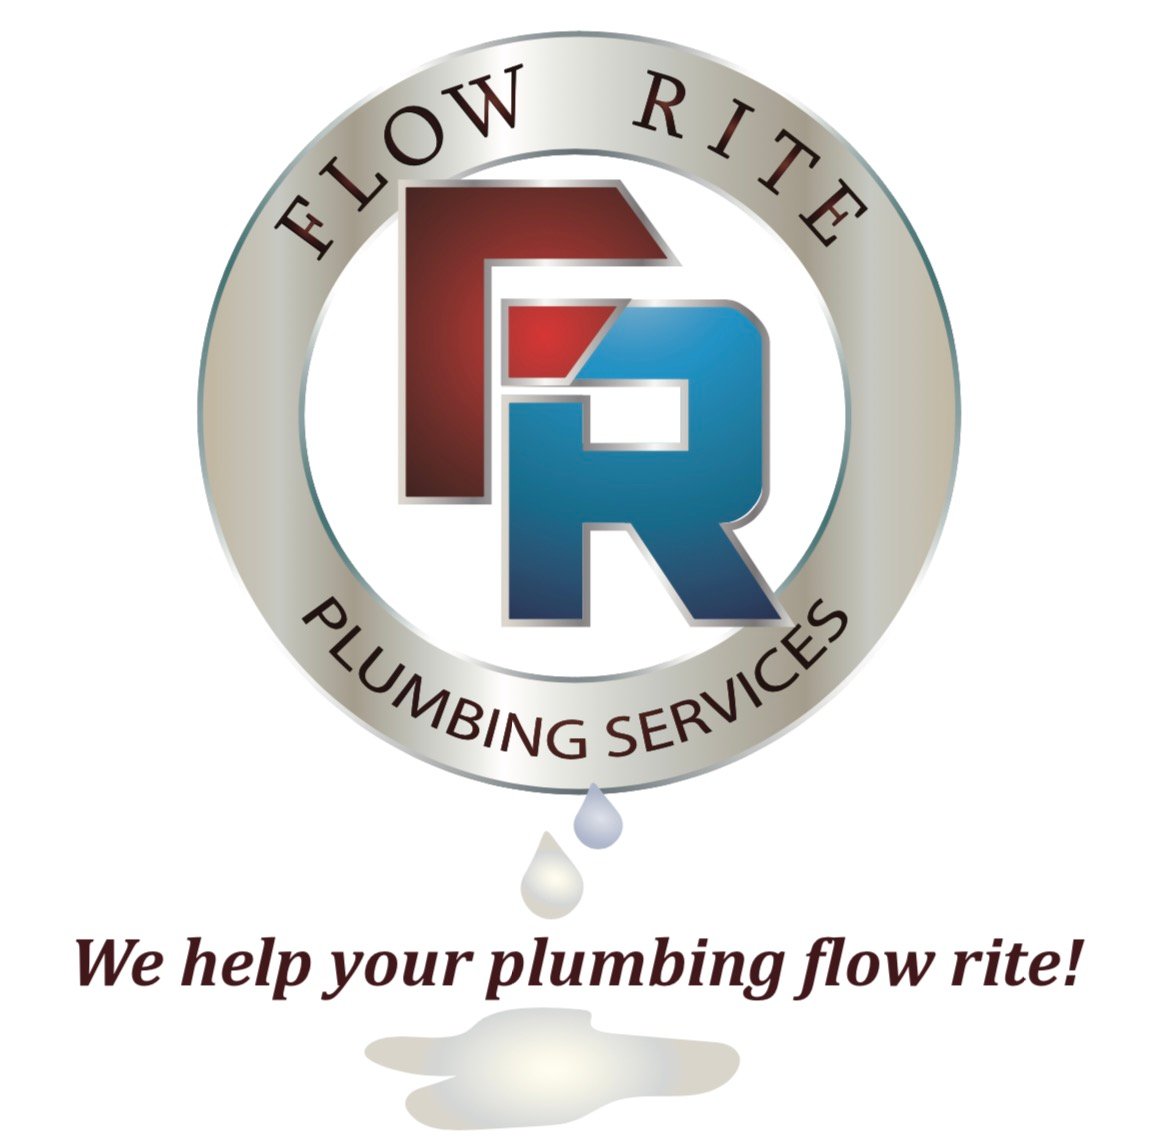 Flow Rite Plumbing Services is a Licensed Plumbing Company specializing in Plumbing , Heating and Drain services with over 25 year of experience.